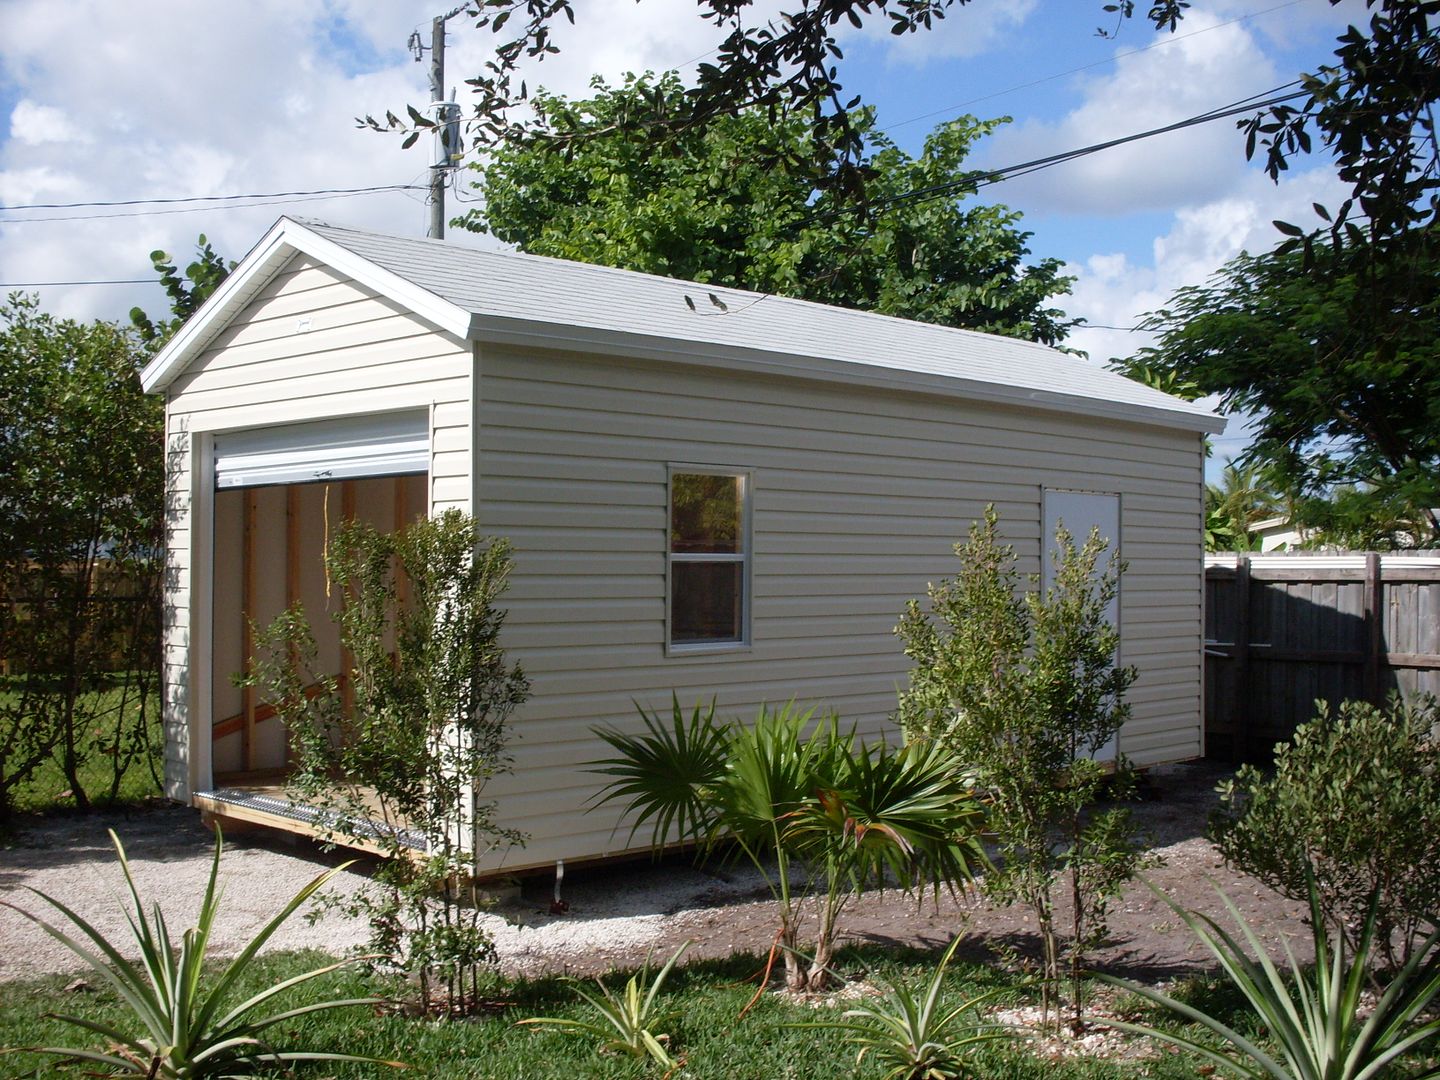 Miami Dade County approved STORAGE SHEDS - Www. Suncrestshed. Com 